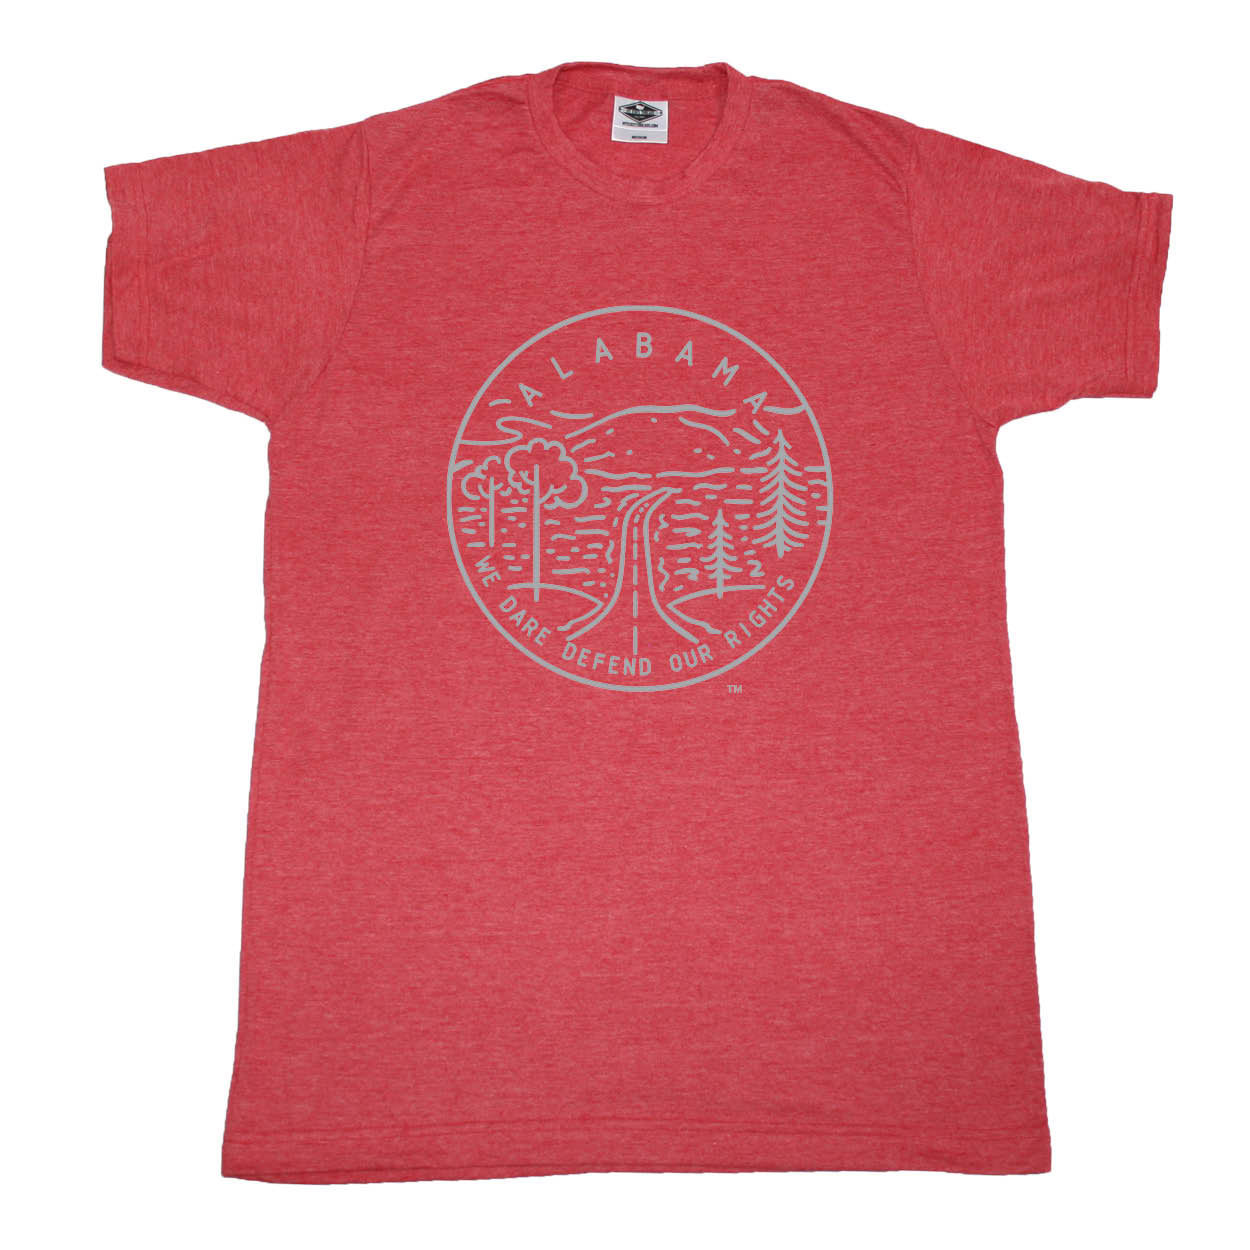 ALABAMA RED TEE | STATE SEAL |  WE DARE DEFEND OUR RIGHTS